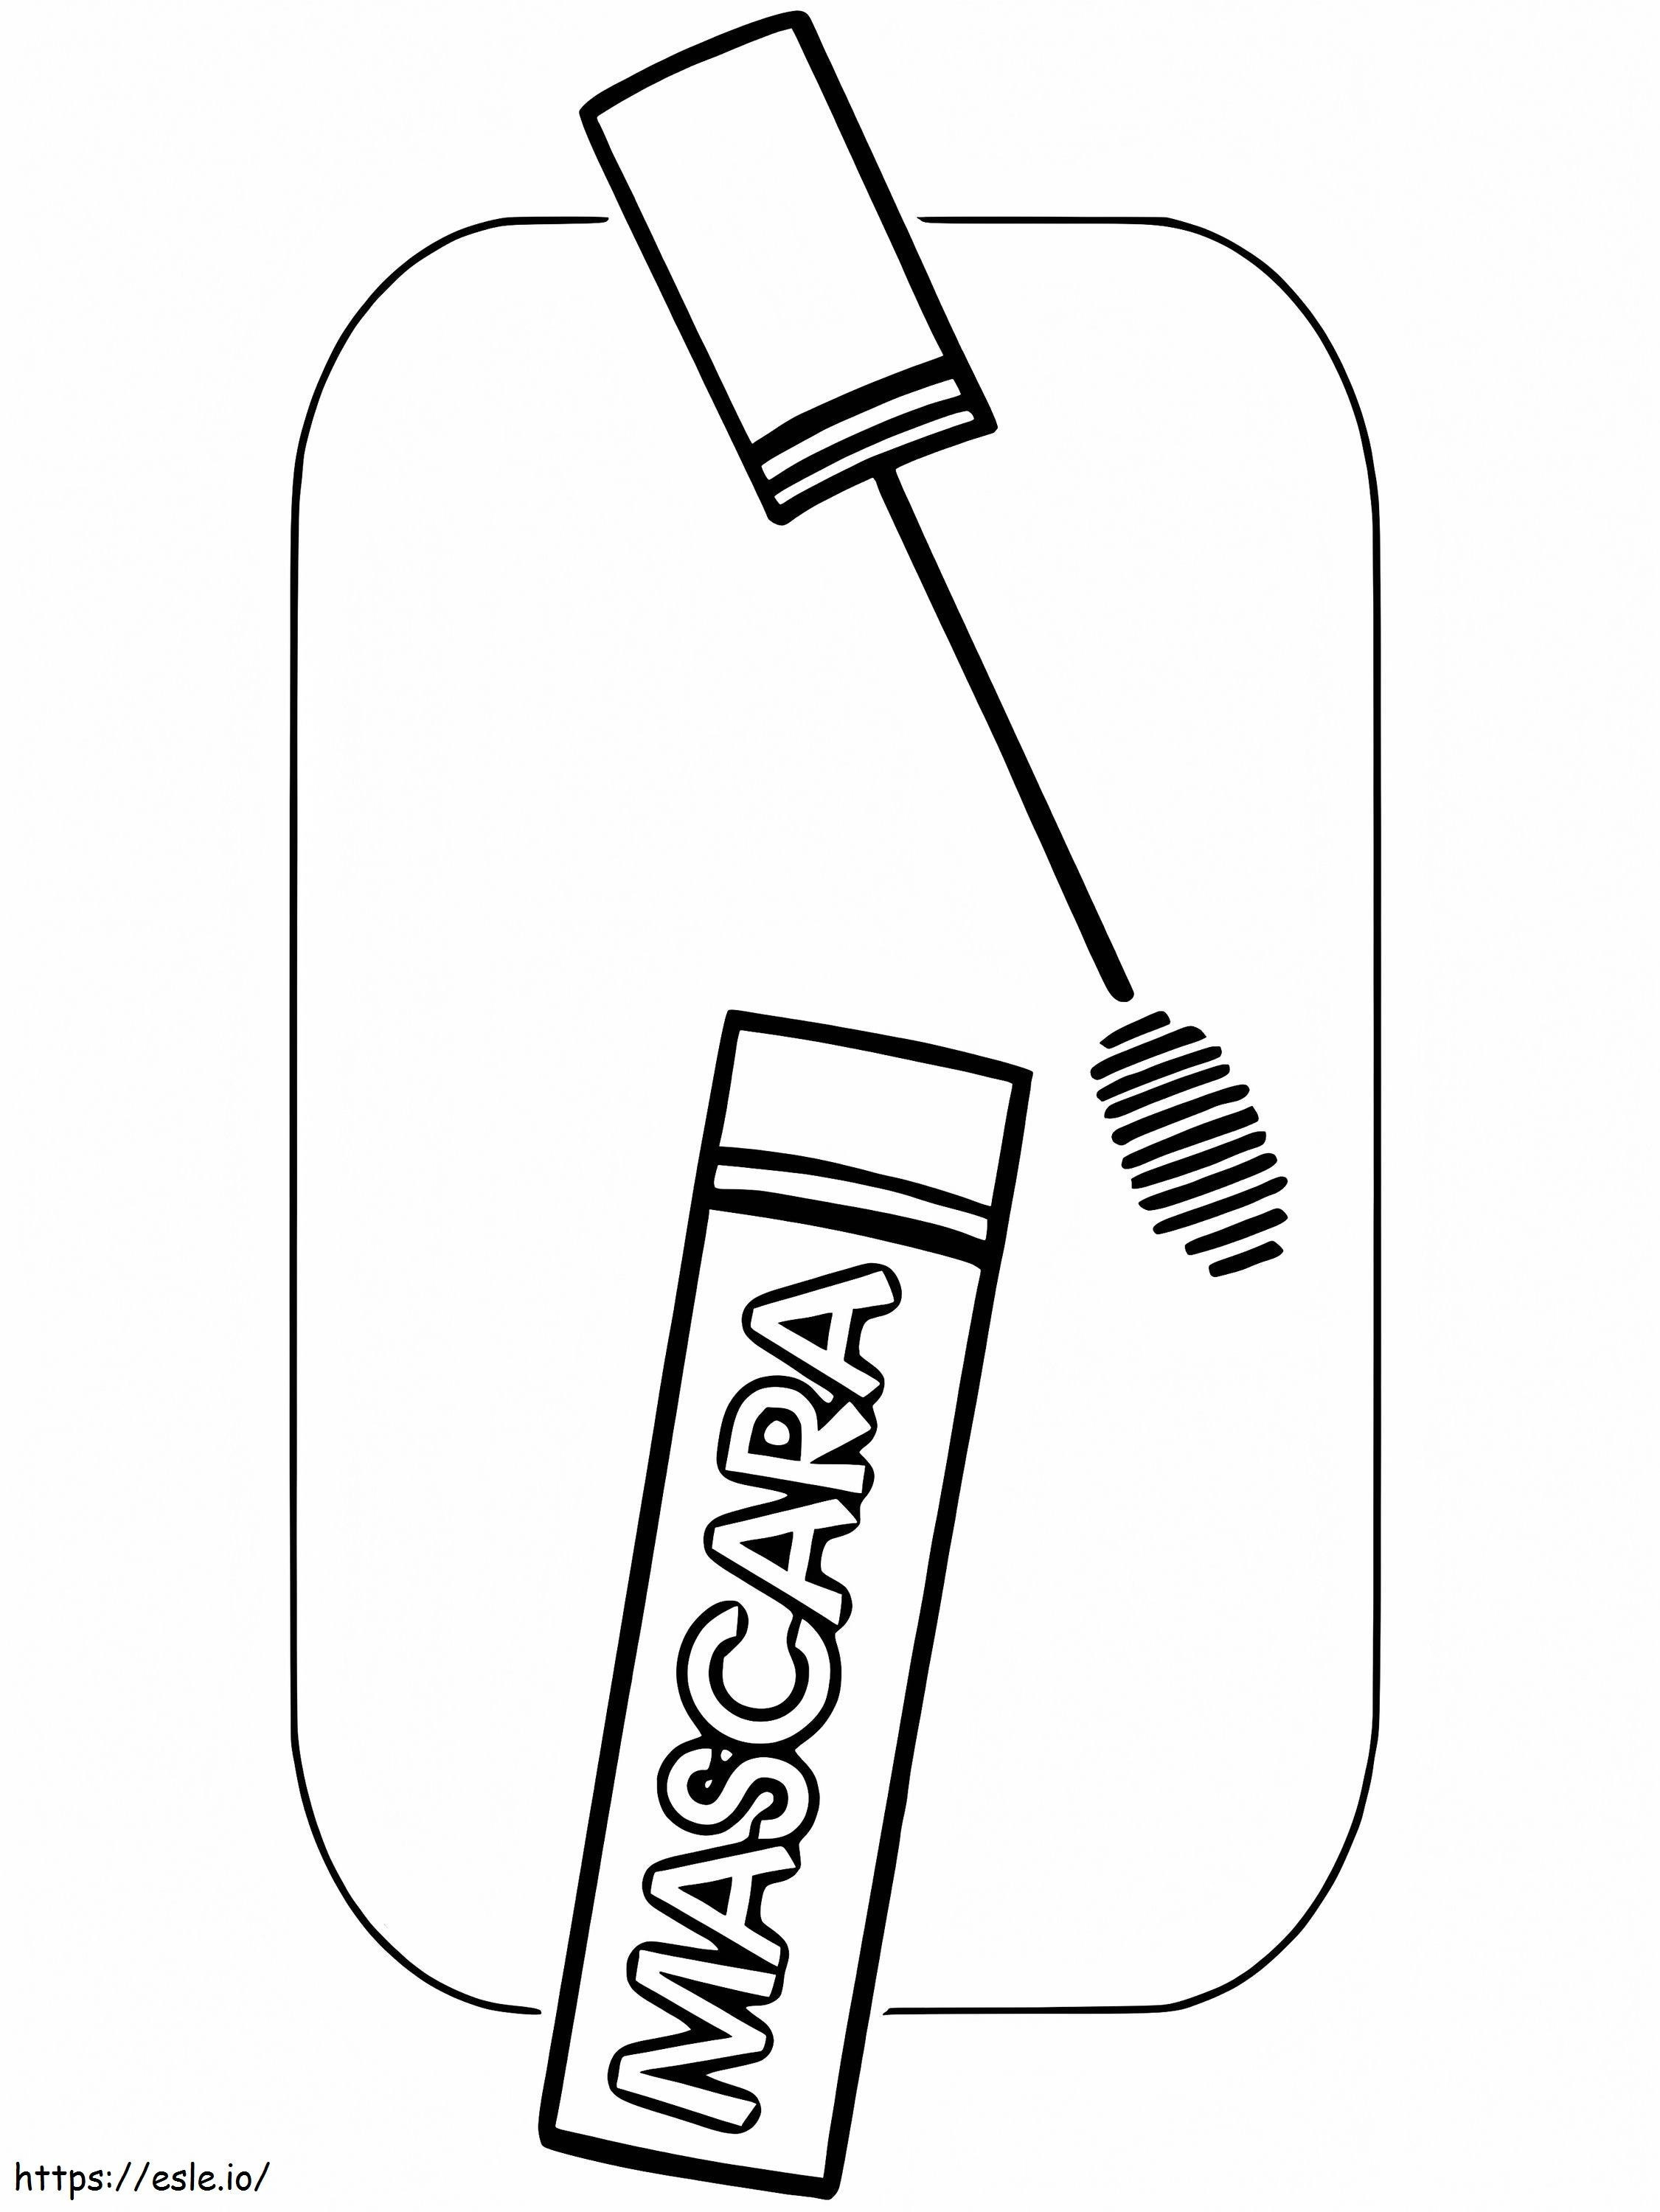 Mascara Cosmetic coloring page